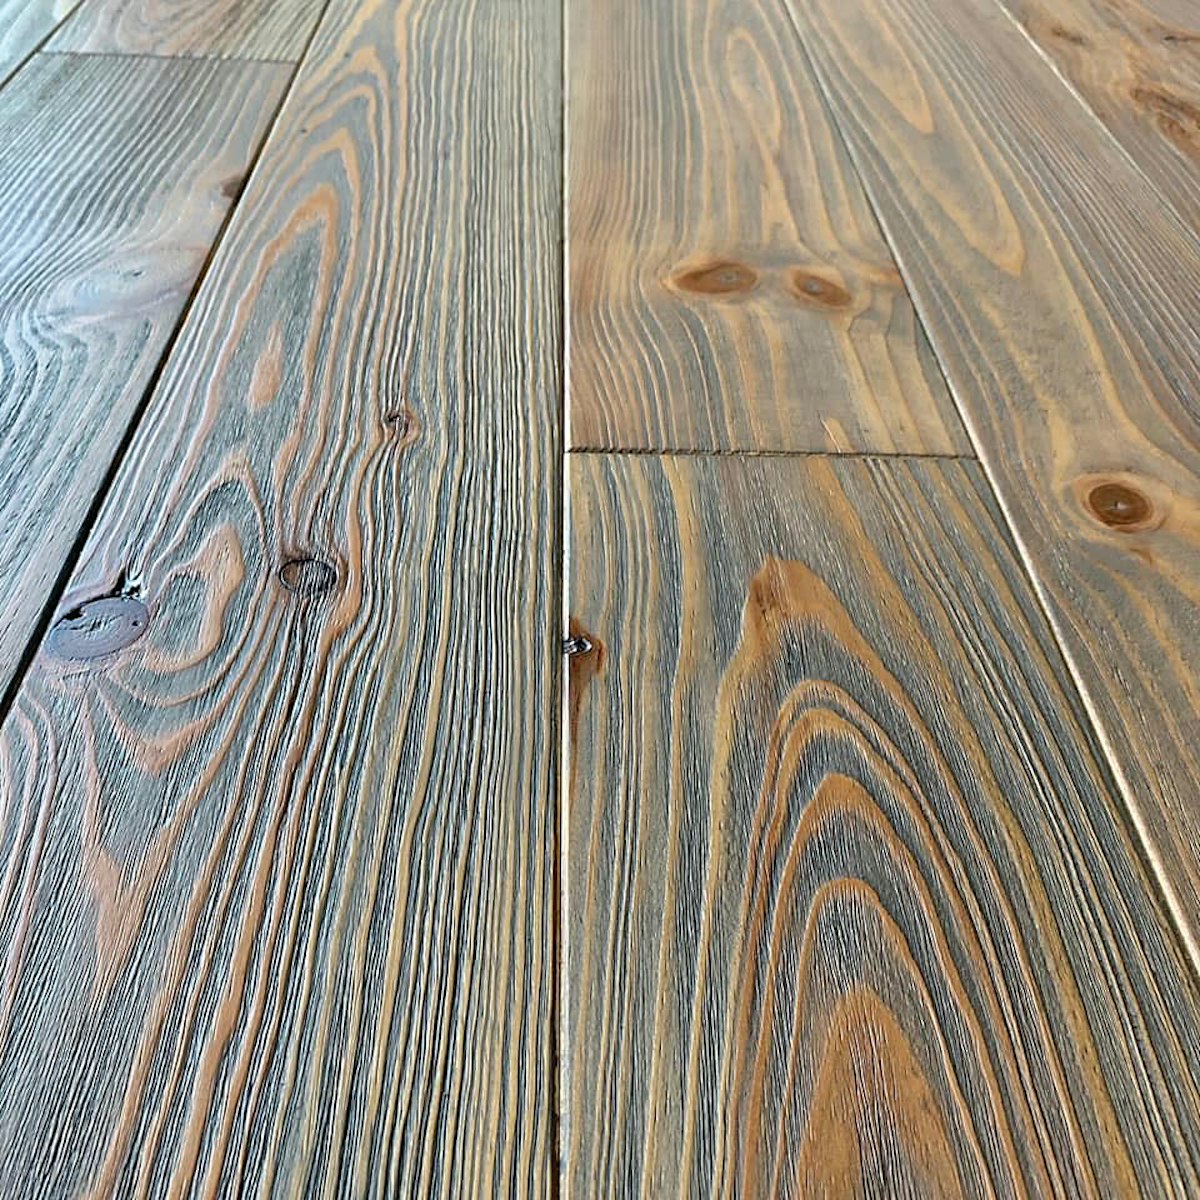 Rubio Monocoat Flooring Products for Your Creative Wood Floors